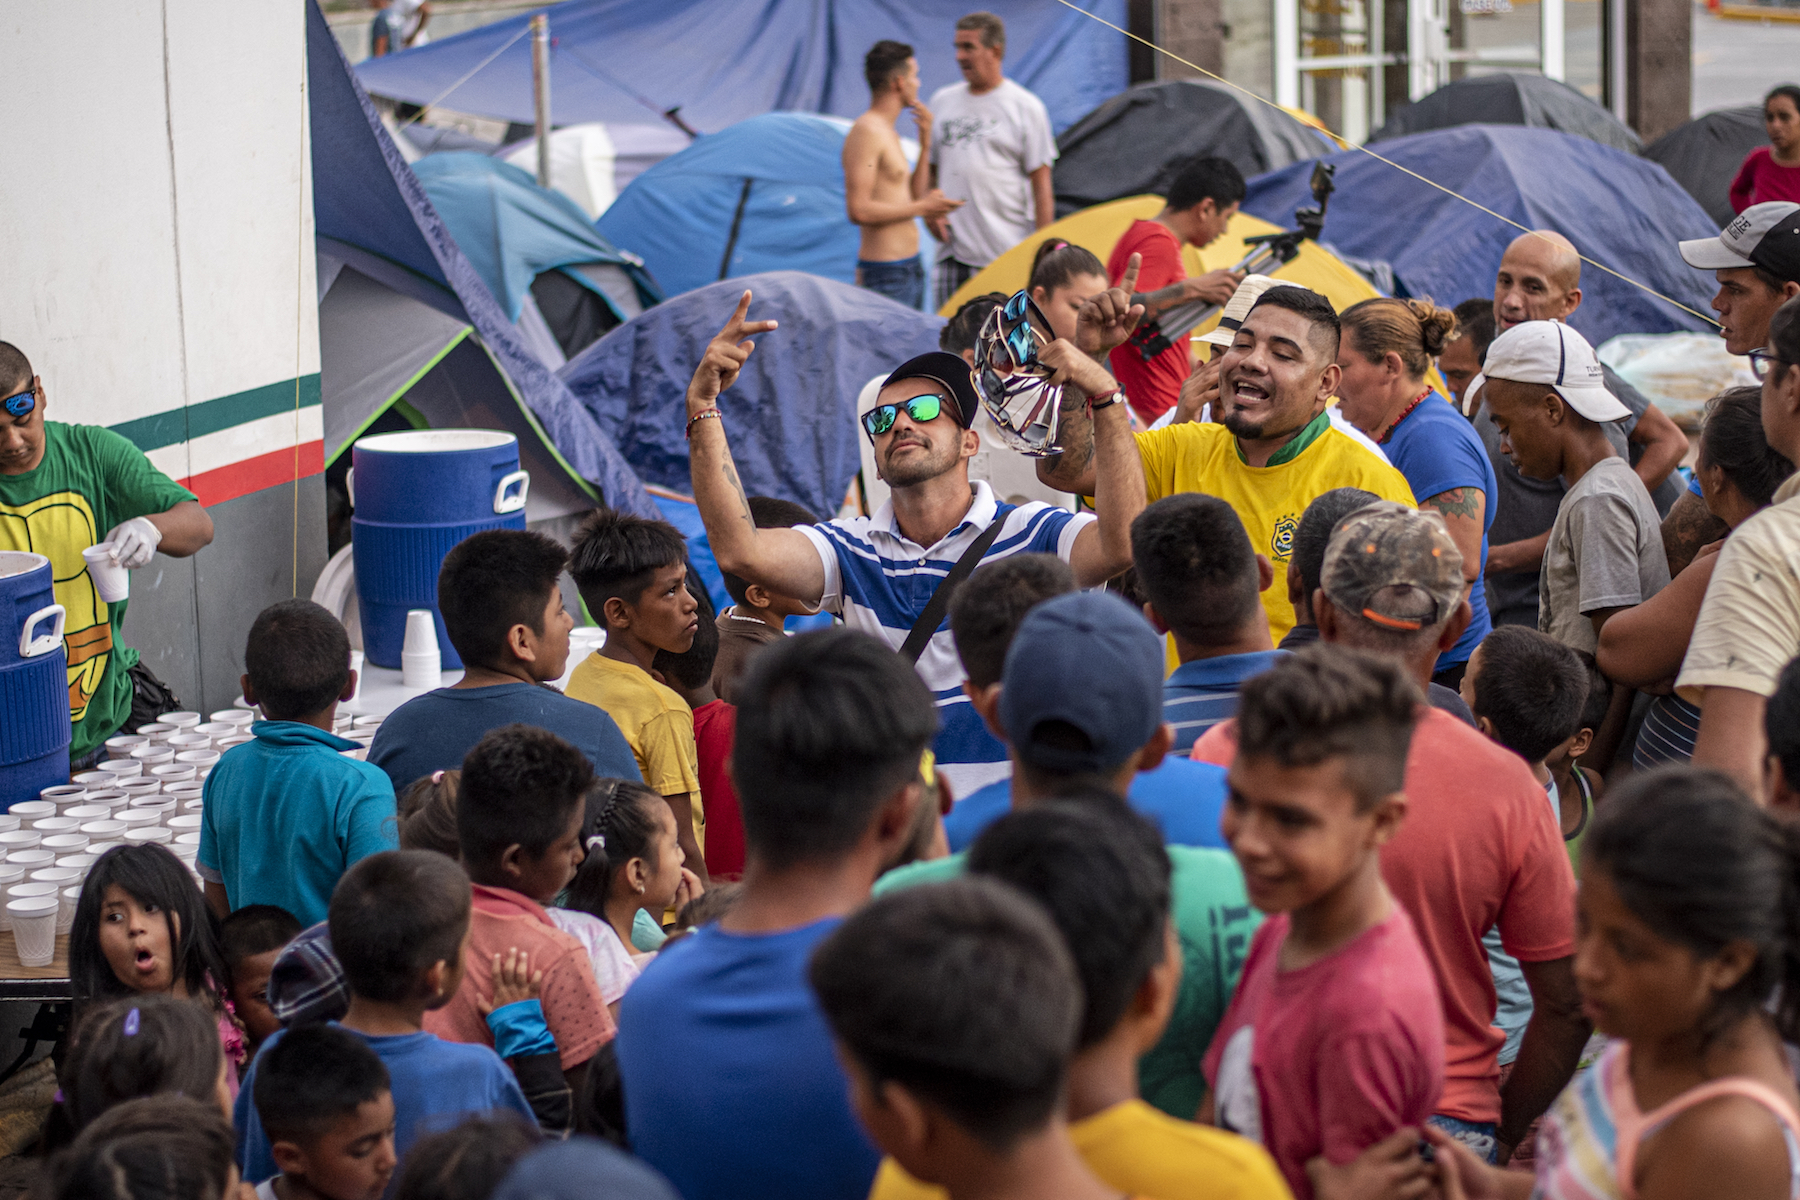 Volunteers from Mateo 25:35 rap while migrants wait in line for food. Photo by Sergio Flores.